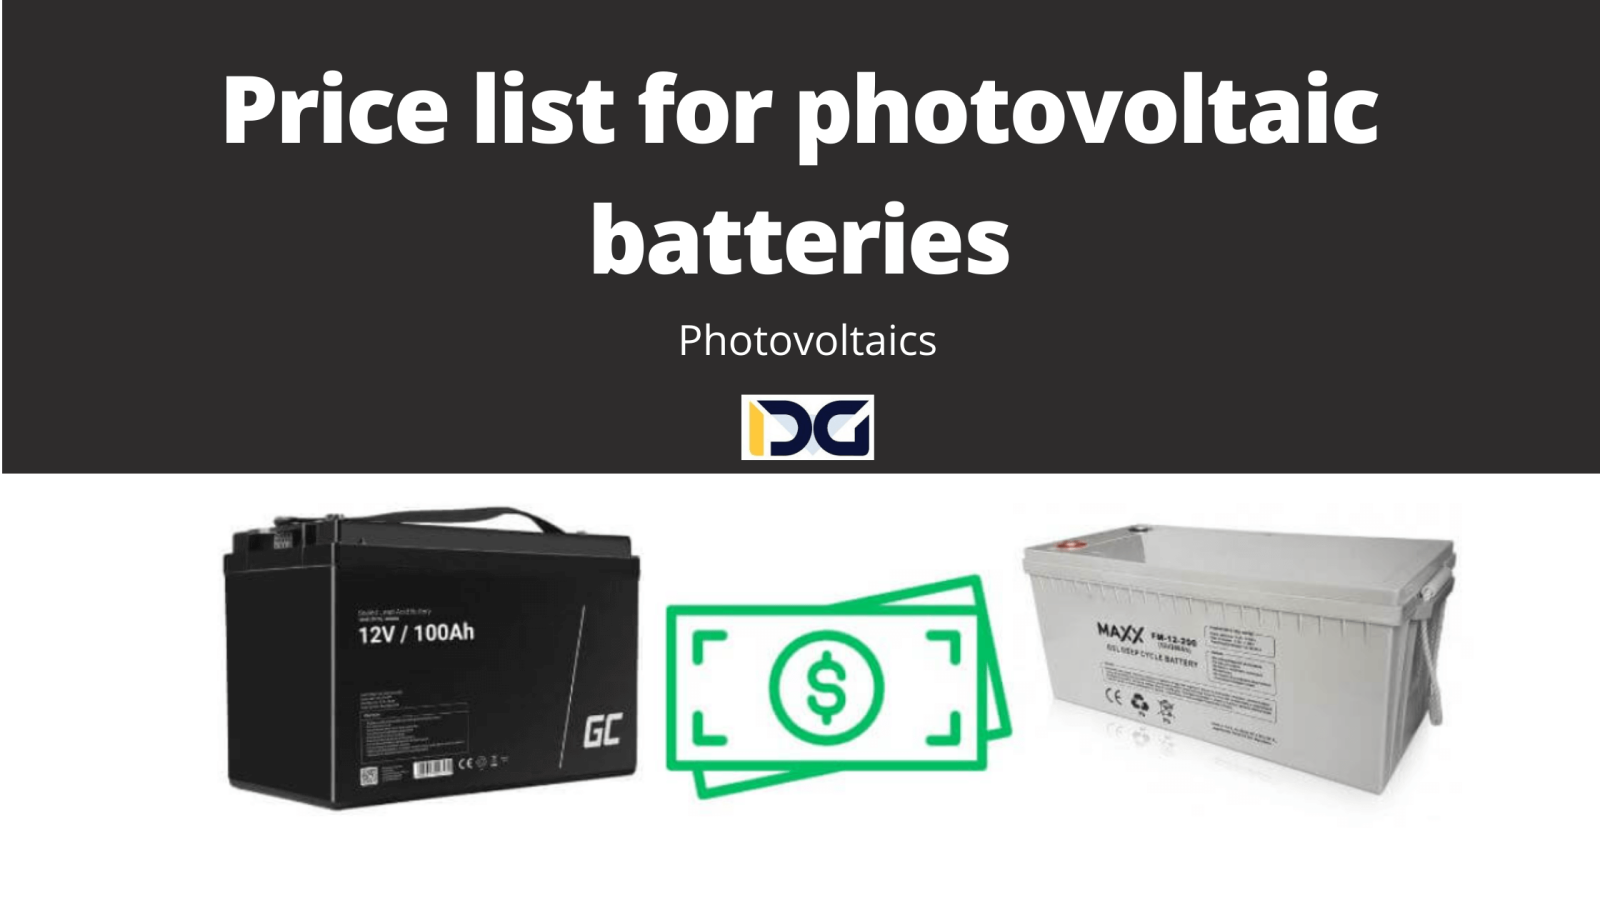 Price list for photovoltaic batteries